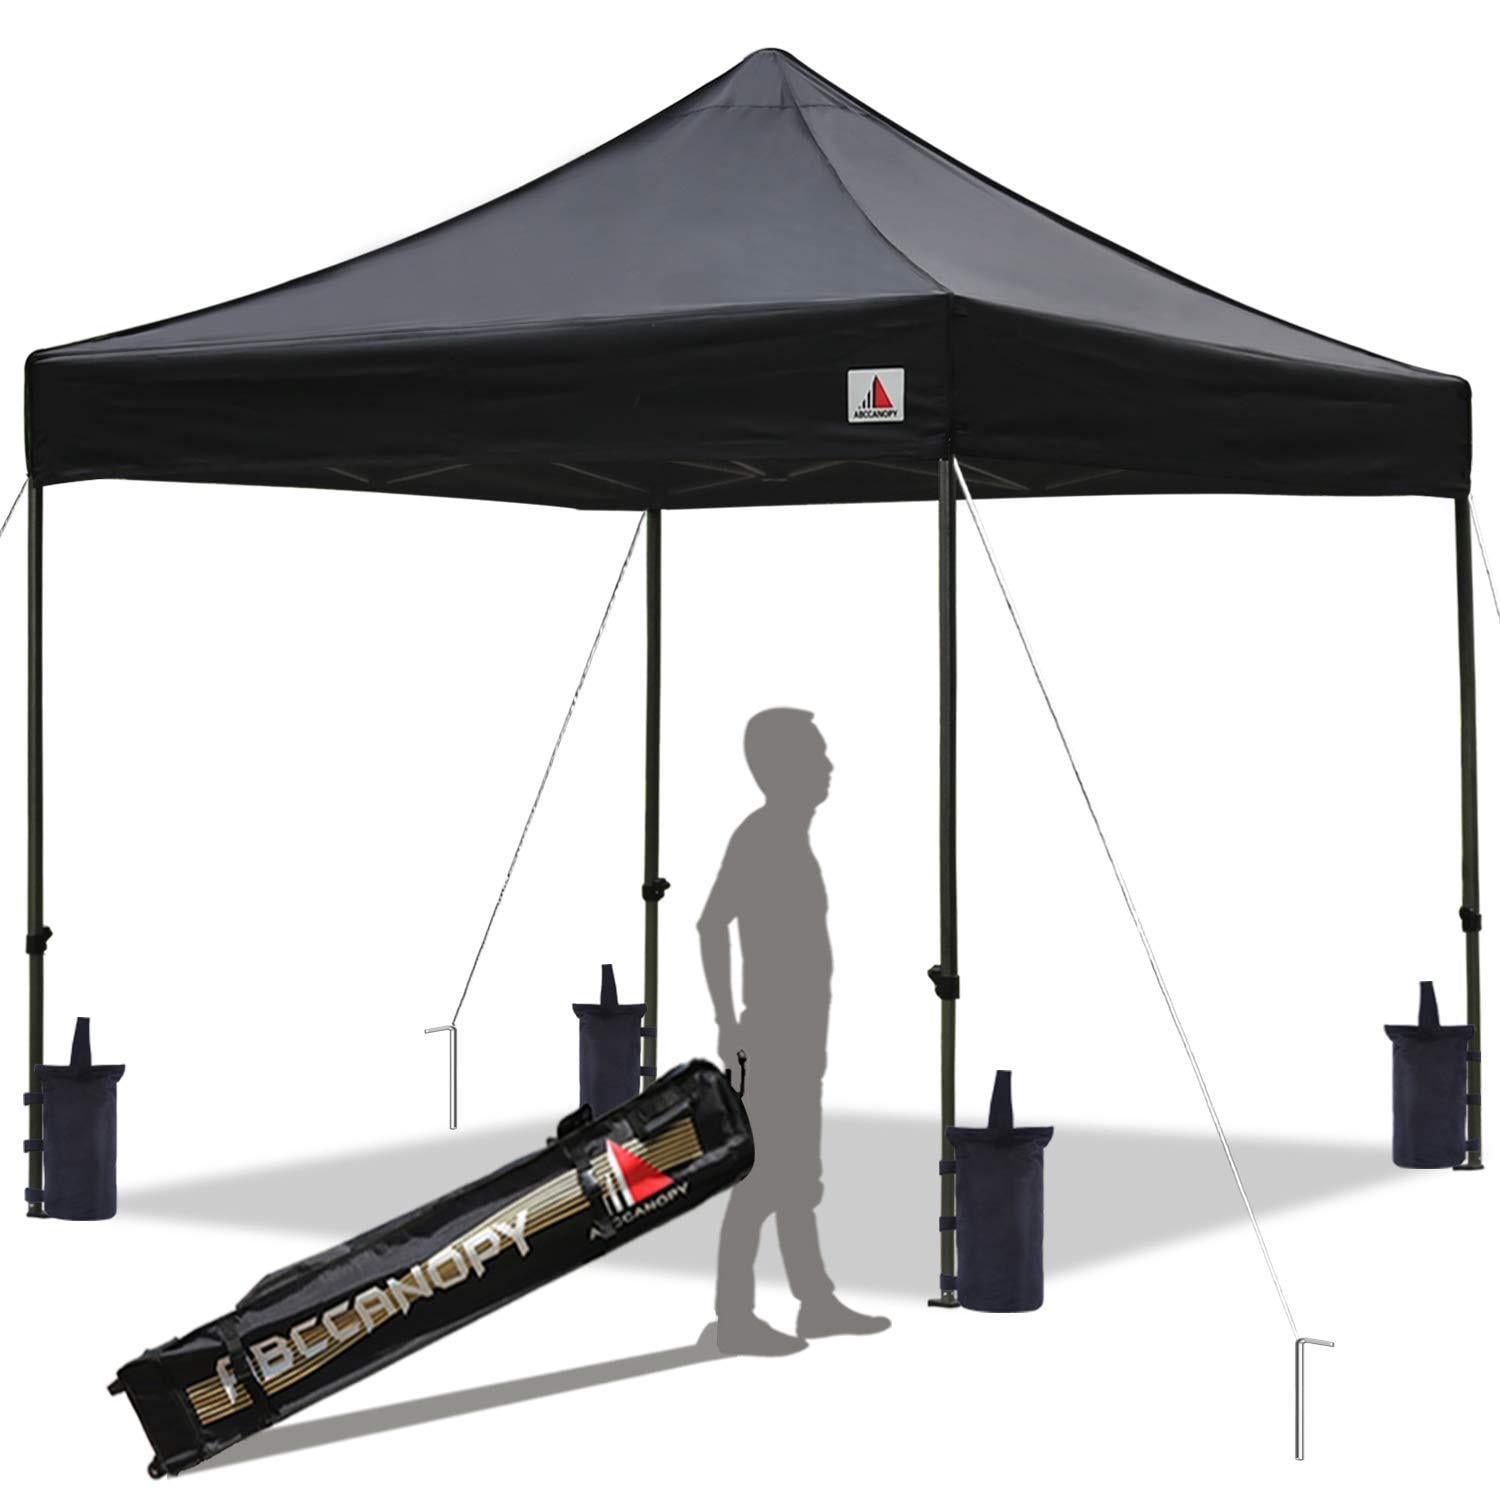 ABCCANOPY A3 10x10 Ez Pop Up Canopy Instant Shelter Outdoor Party Tent Gazebo 